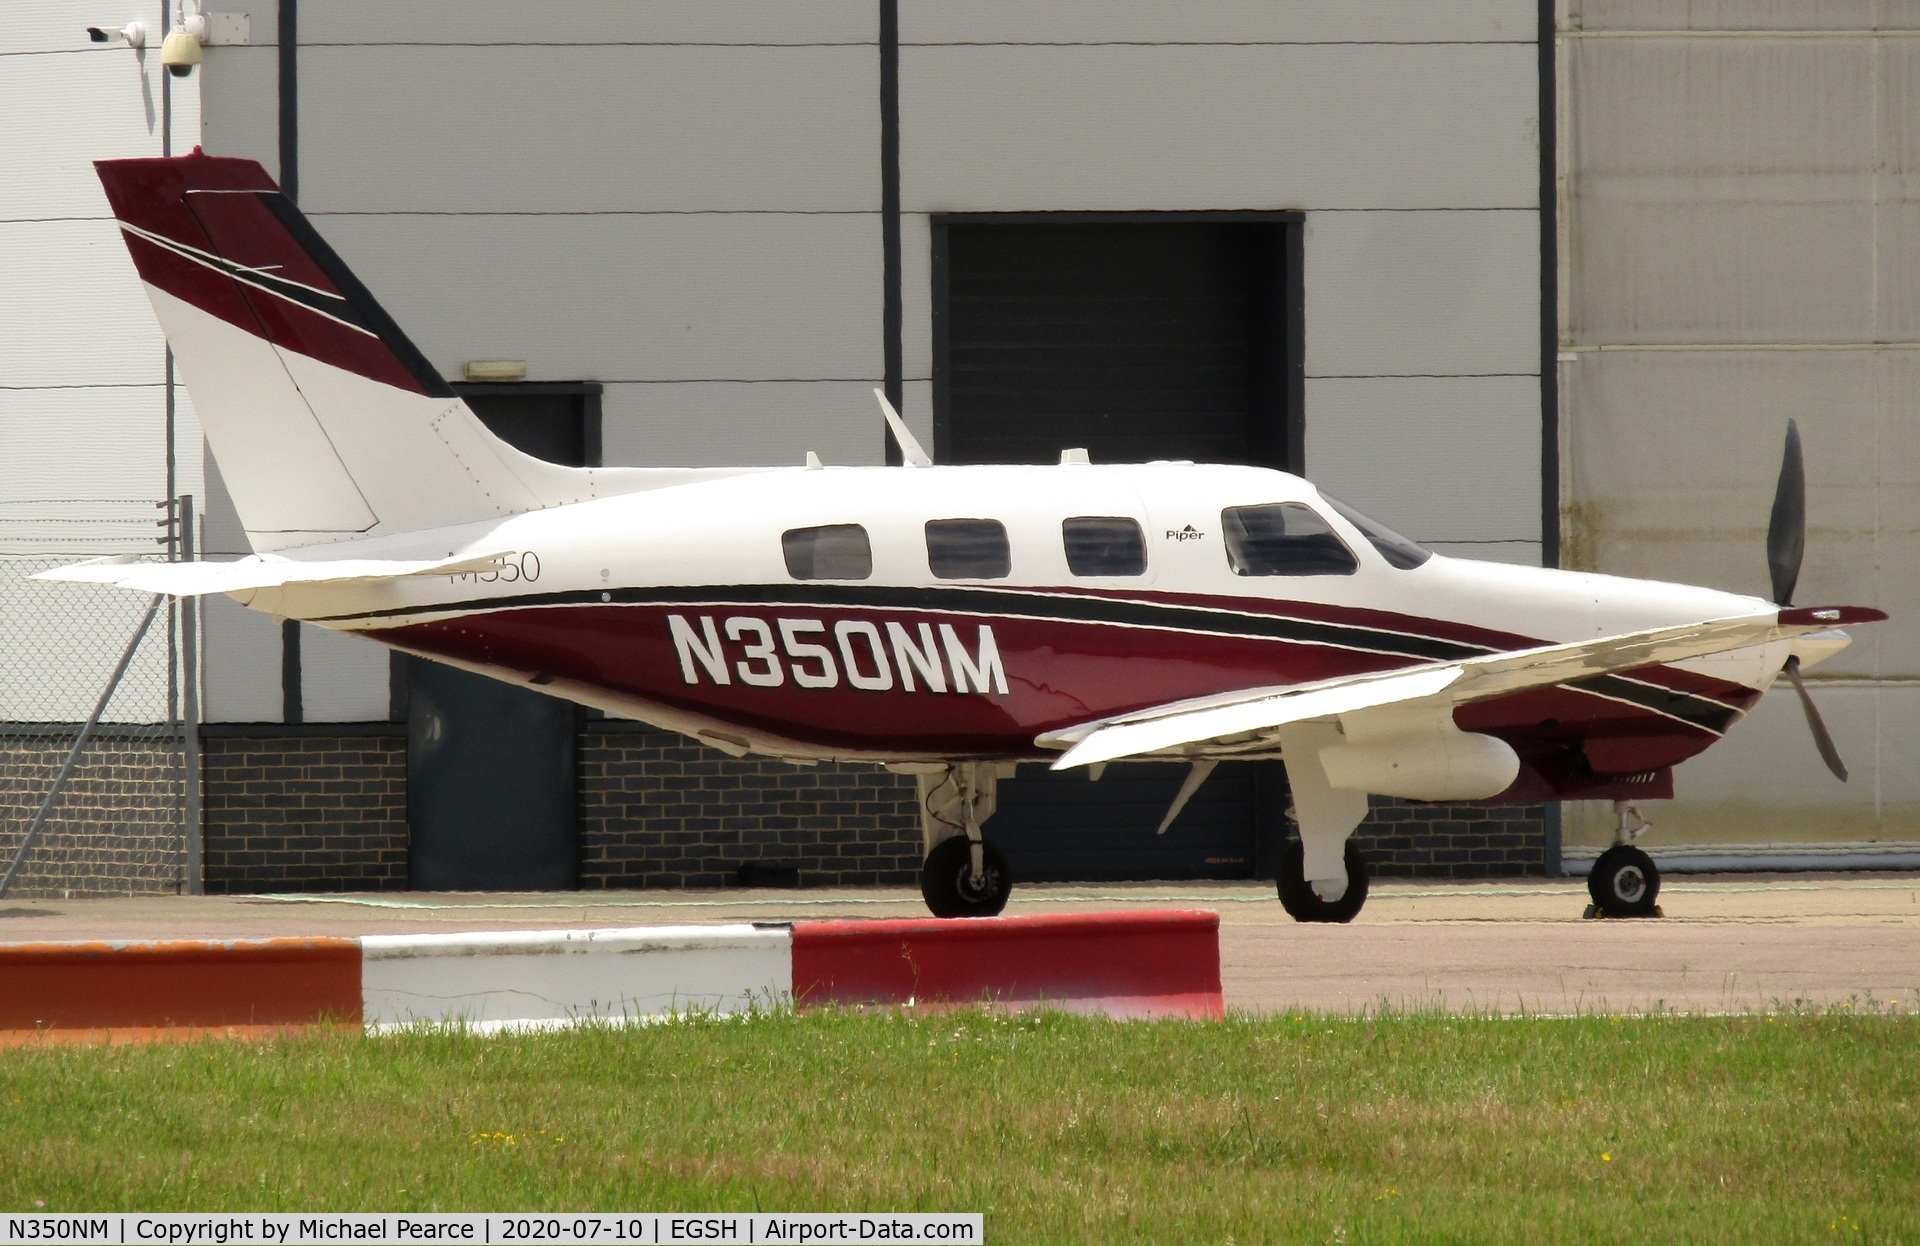 N350NM, 2015 Piper PA-46-350P Malibu Mirage Malibu Mirage C/N 4636659, Parked at SaxonAir shortly after arrival from Coventry (CVT).